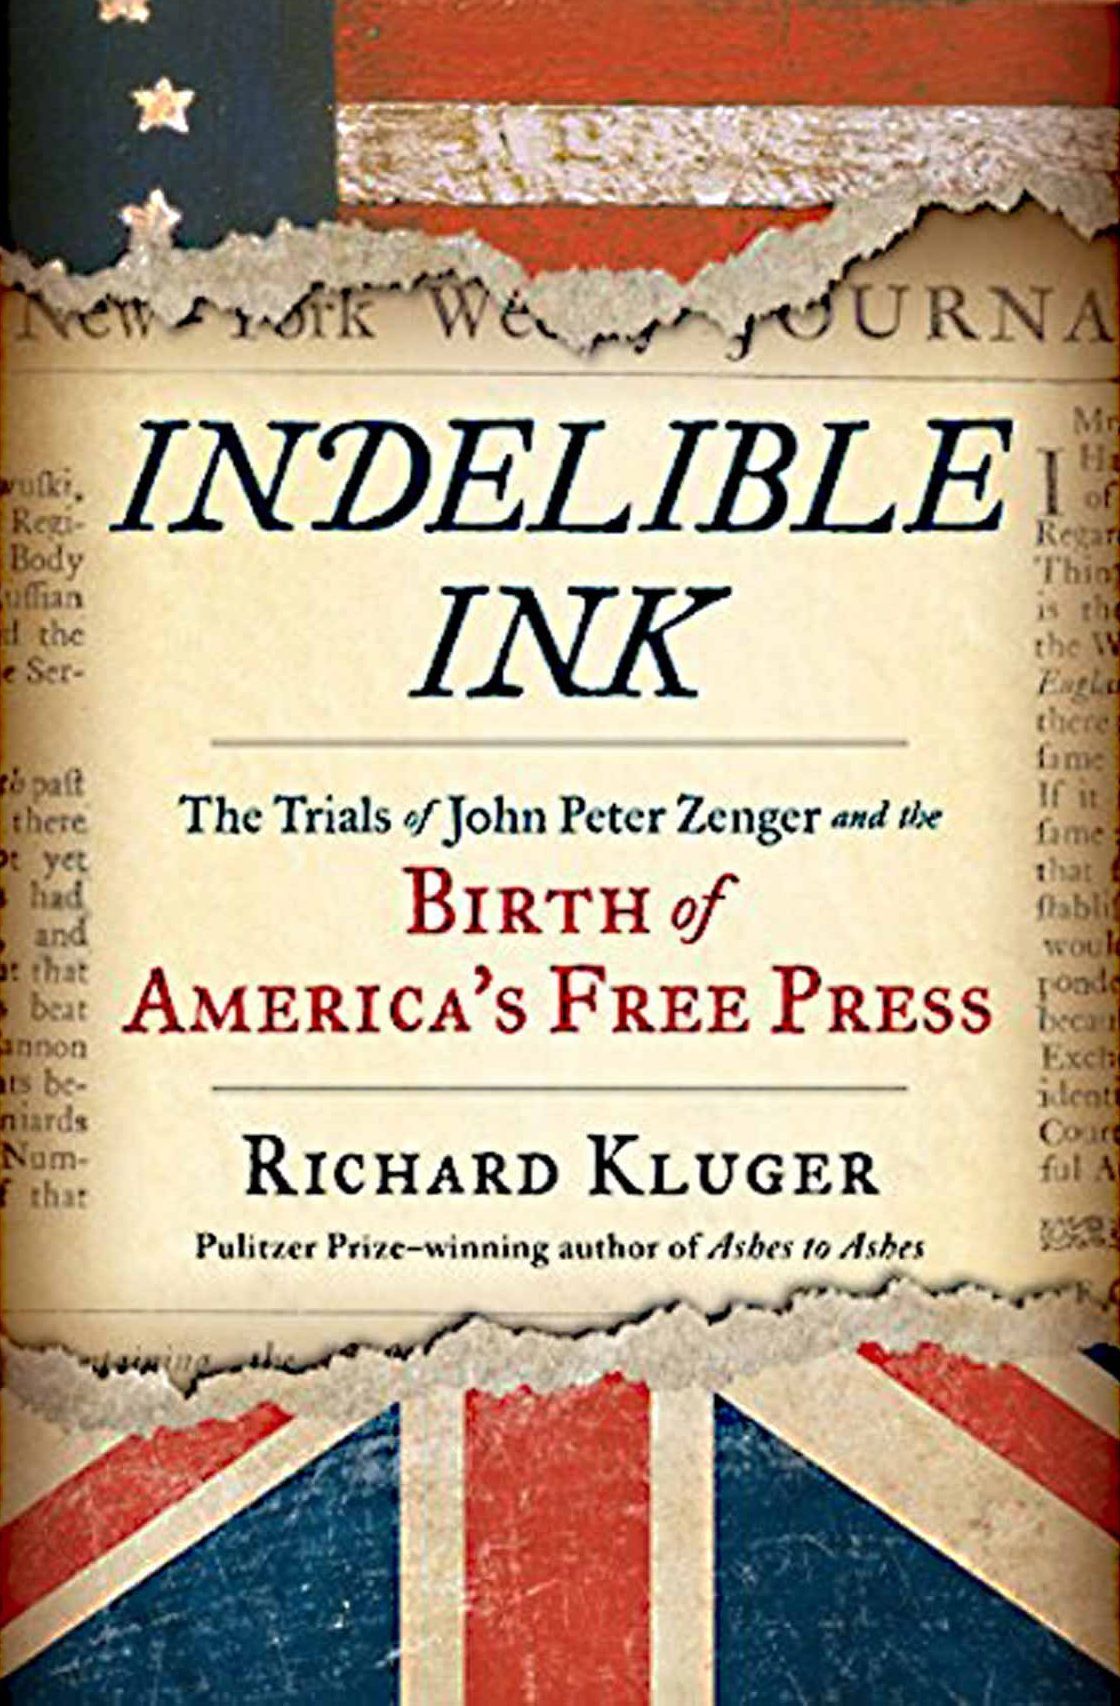 A Thin-Skinned, Moody Martinet Threatens the Free Press: On Richard Kluger’s “Indelible Ink”